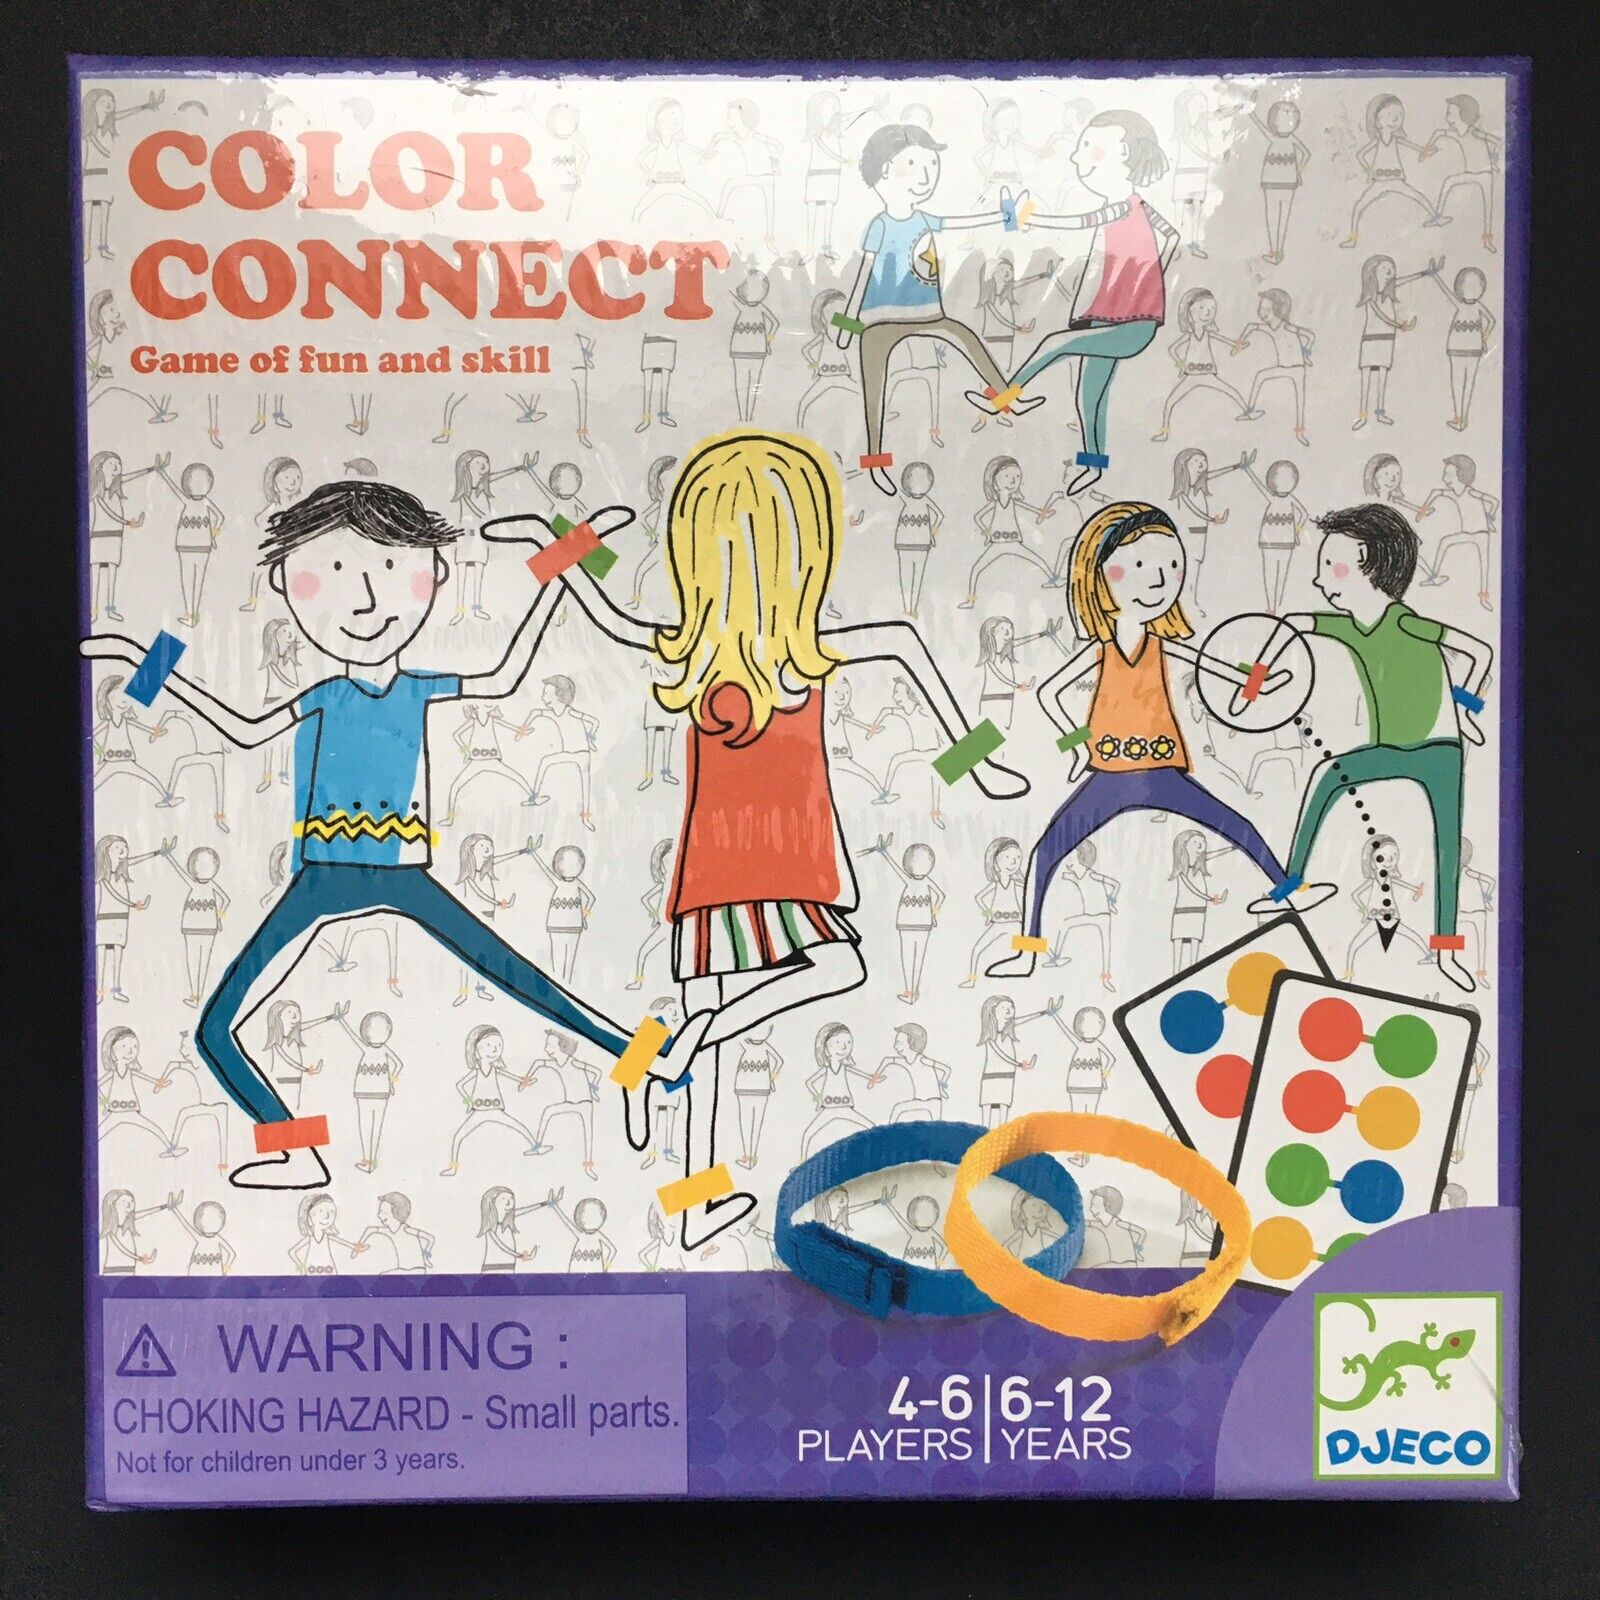 MEMORY Games for 4 YEAR OLDS on COKOGAMES